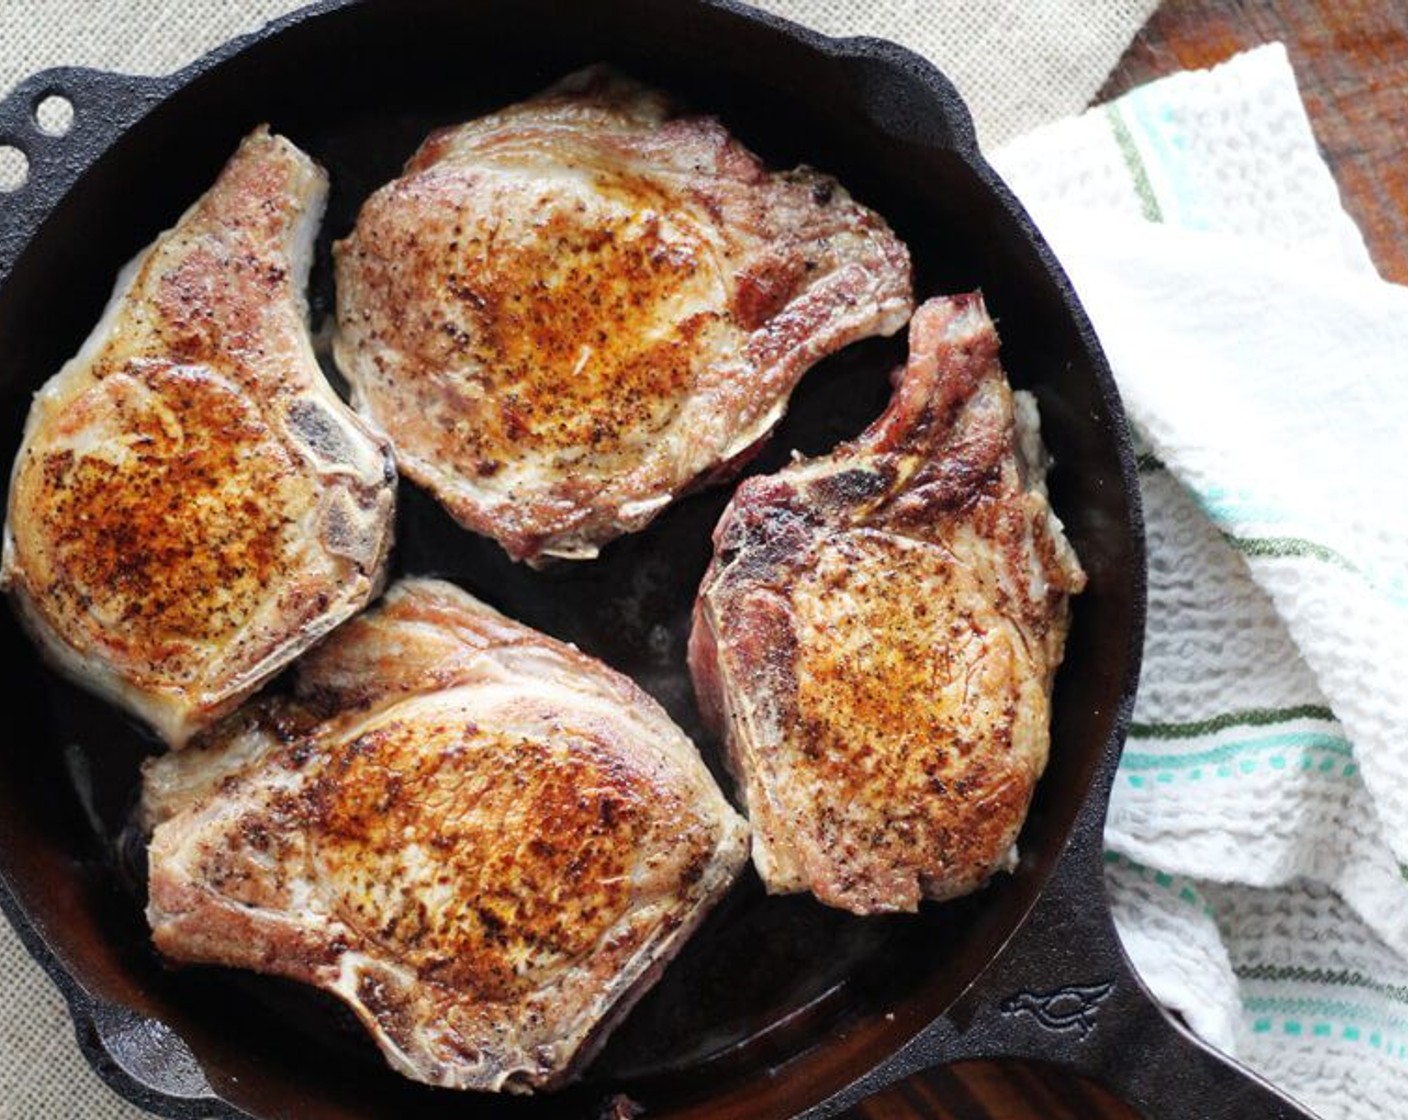 step 5 When the oil starts to shimmer and smoke slightly, place the pork chops into the skillet. Let them cook for approximately 2 minutes per side or until golden brown, turning once. Reduce heat if needed to prevent burning.